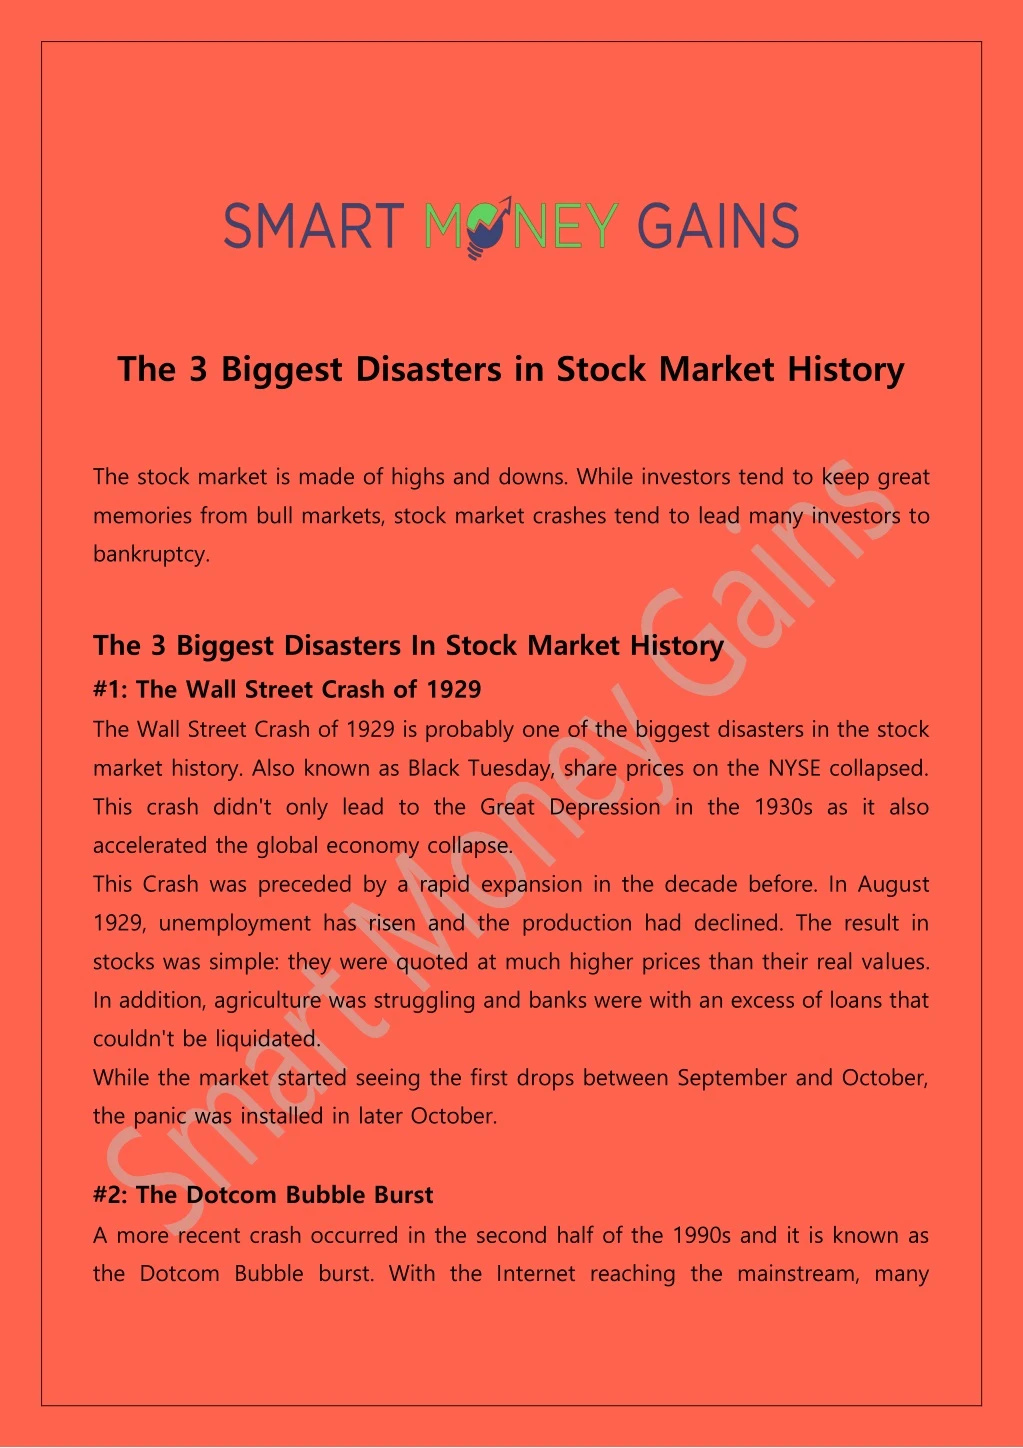 the 3 biggest disasters in stock market history